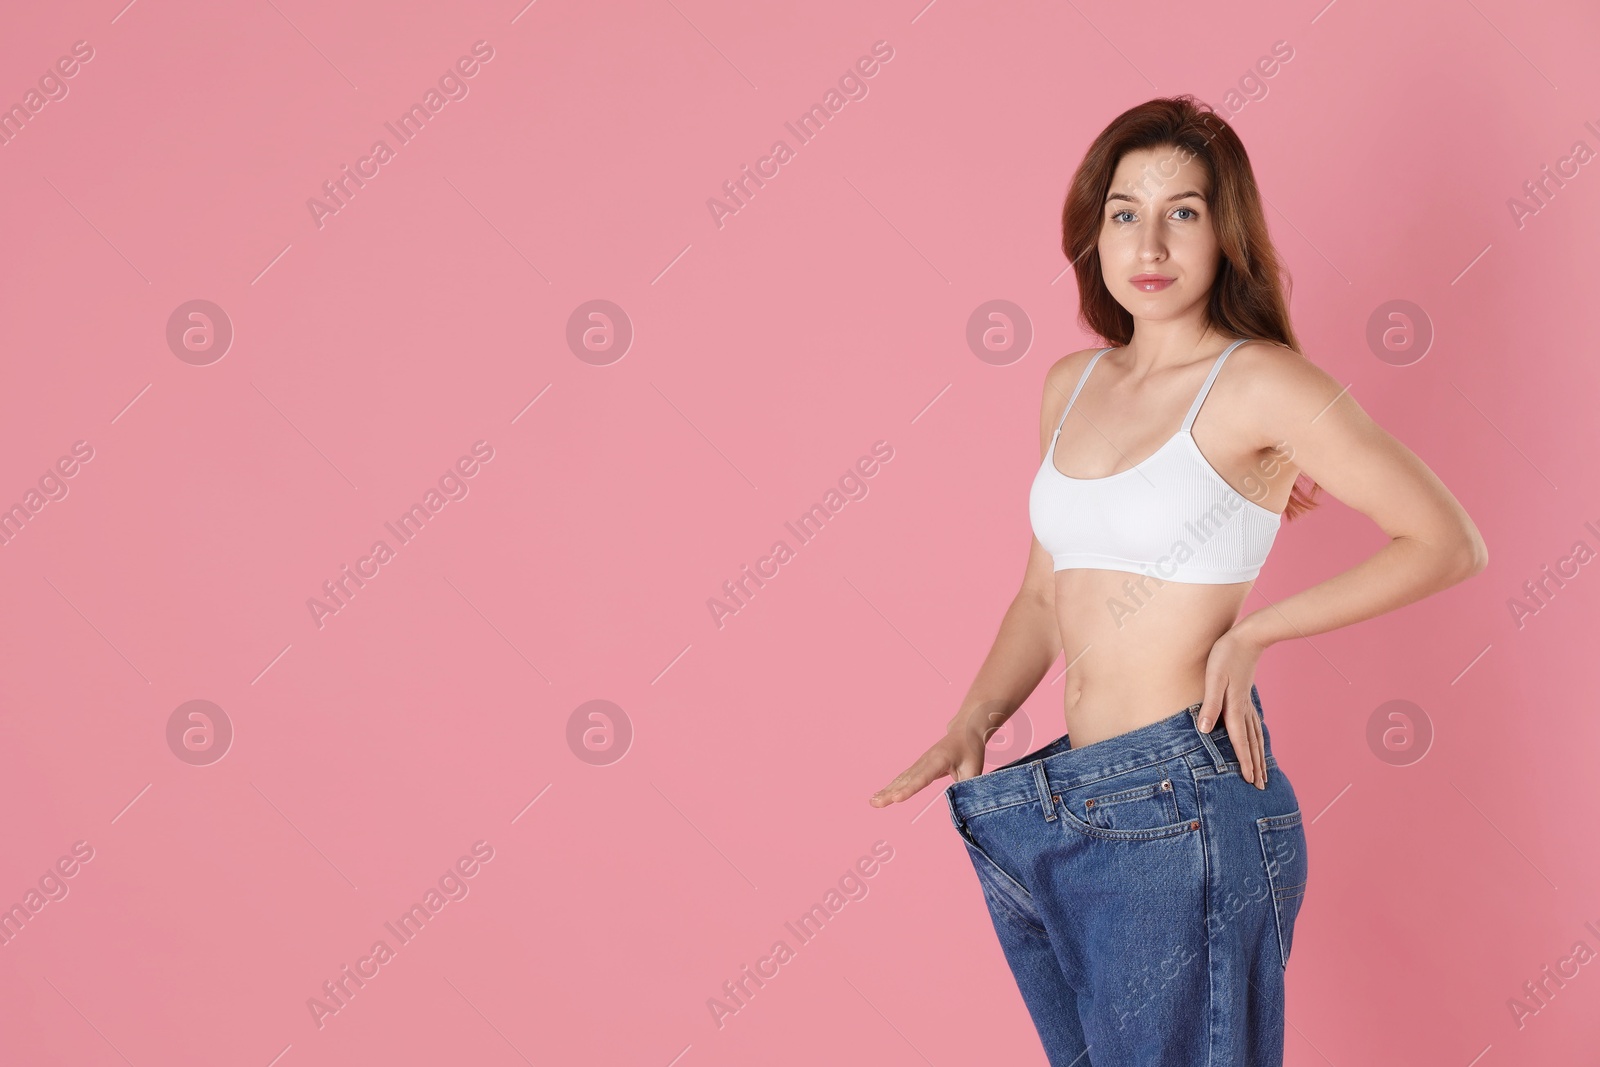 Photo of Woman in big jeans showing her slim body on pink background, space for text